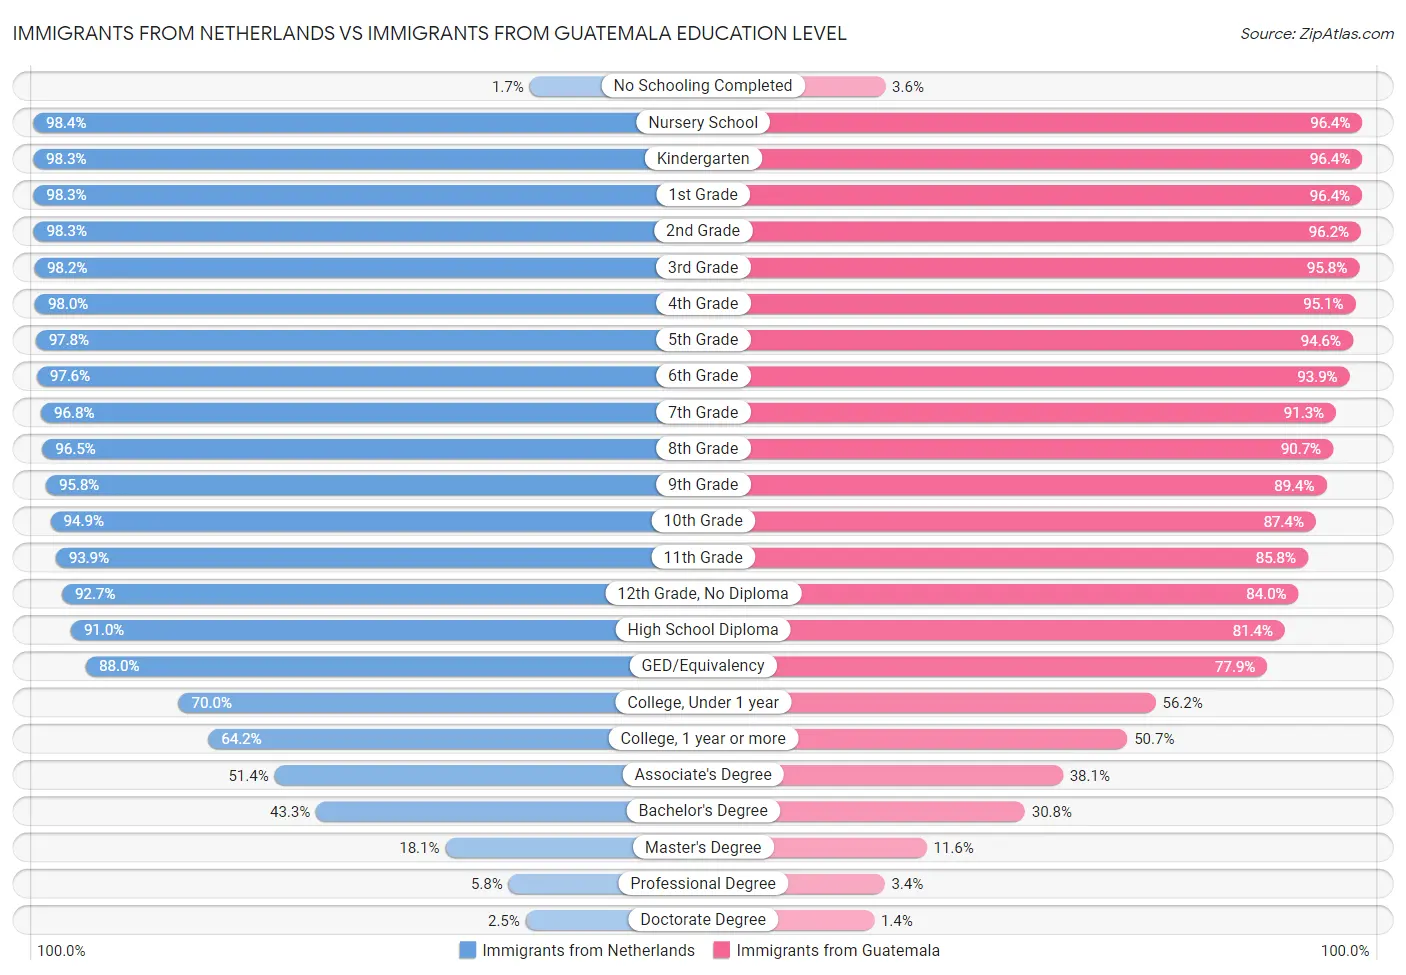 Immigrants from Netherlands vs Immigrants from Guatemala Education Level